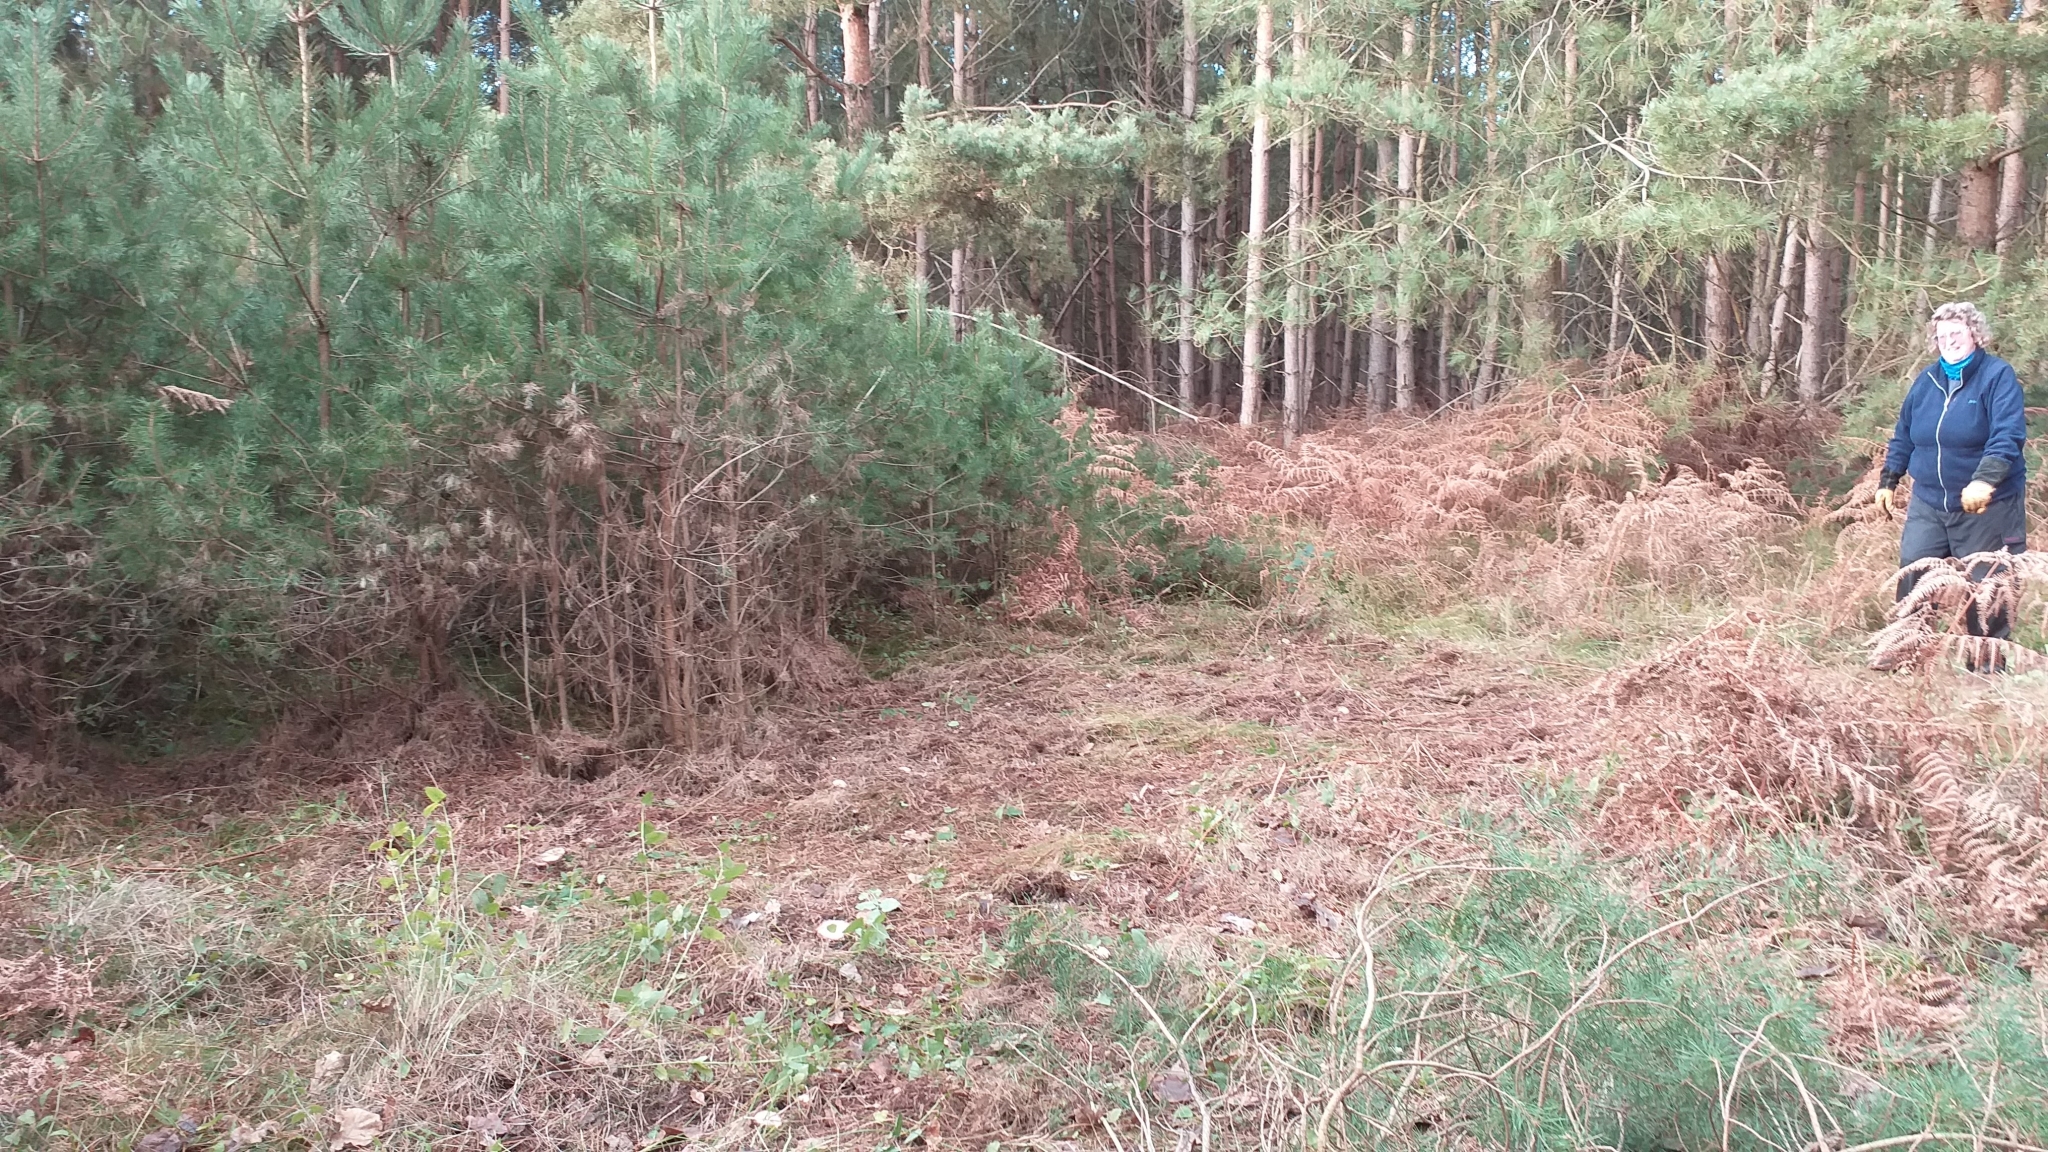 A photo from the FoTF Conservation Event - December 2019 - Self Seeded Pine Tree Removal on the Goshawk Trail : A volunteers walks into shot at the work site